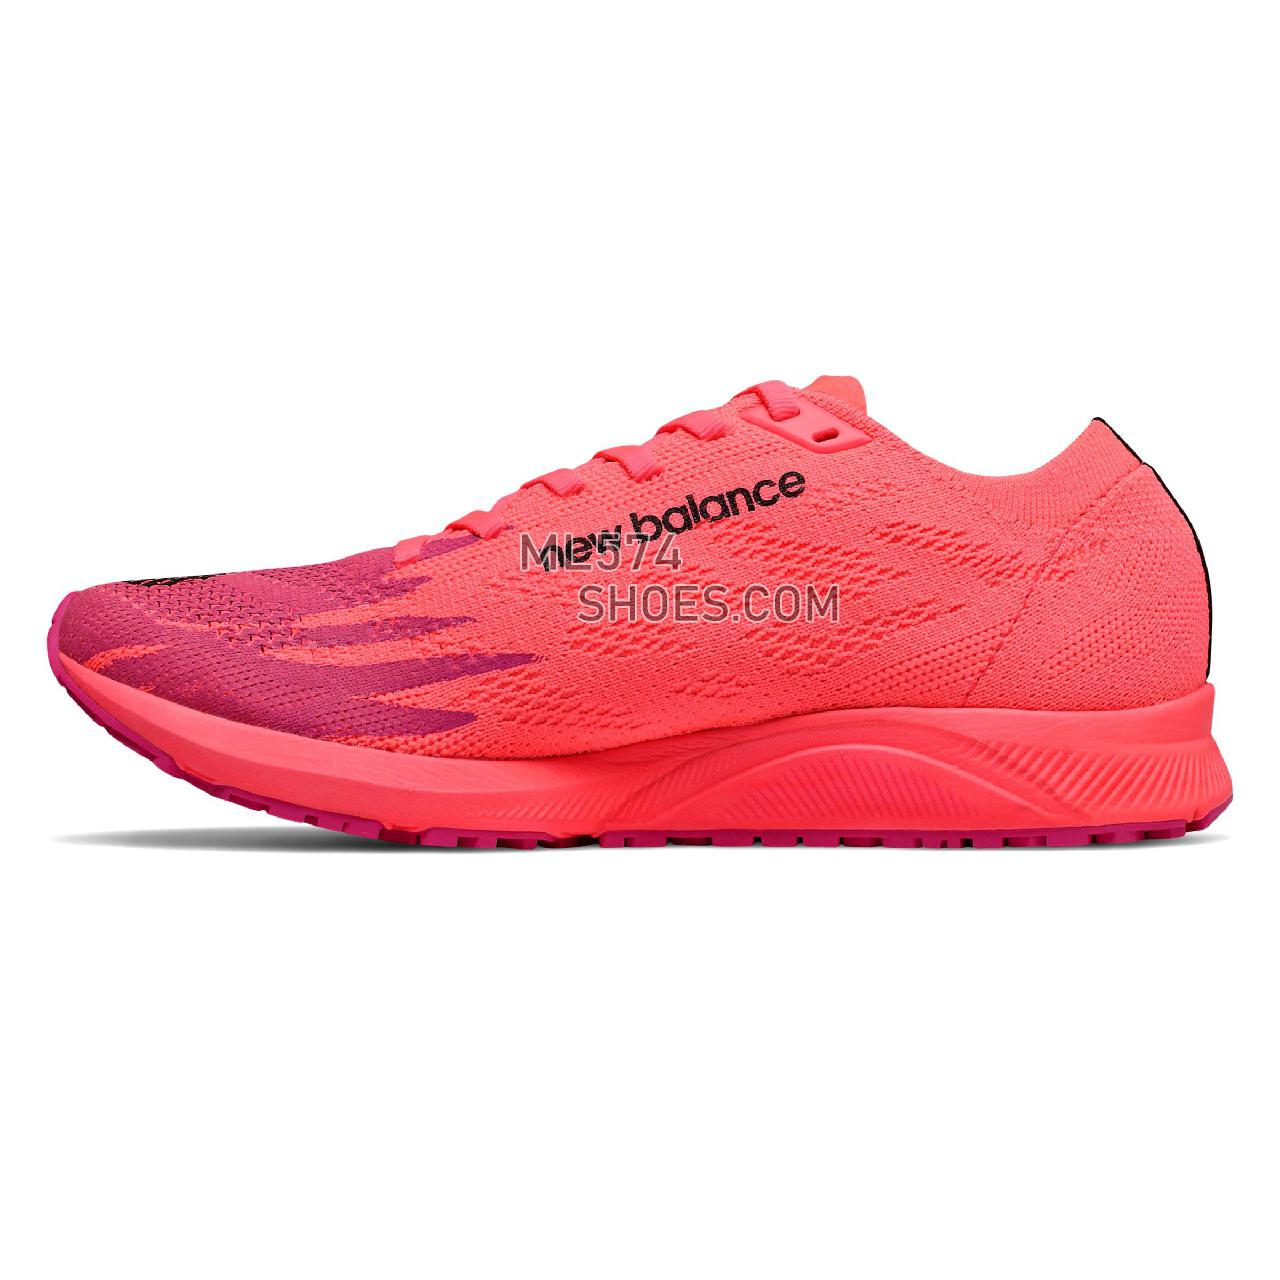 New Balance 1500v6 - Women's Track Spikes And Cross Country - Guava with Peony and Black - W1500GP6